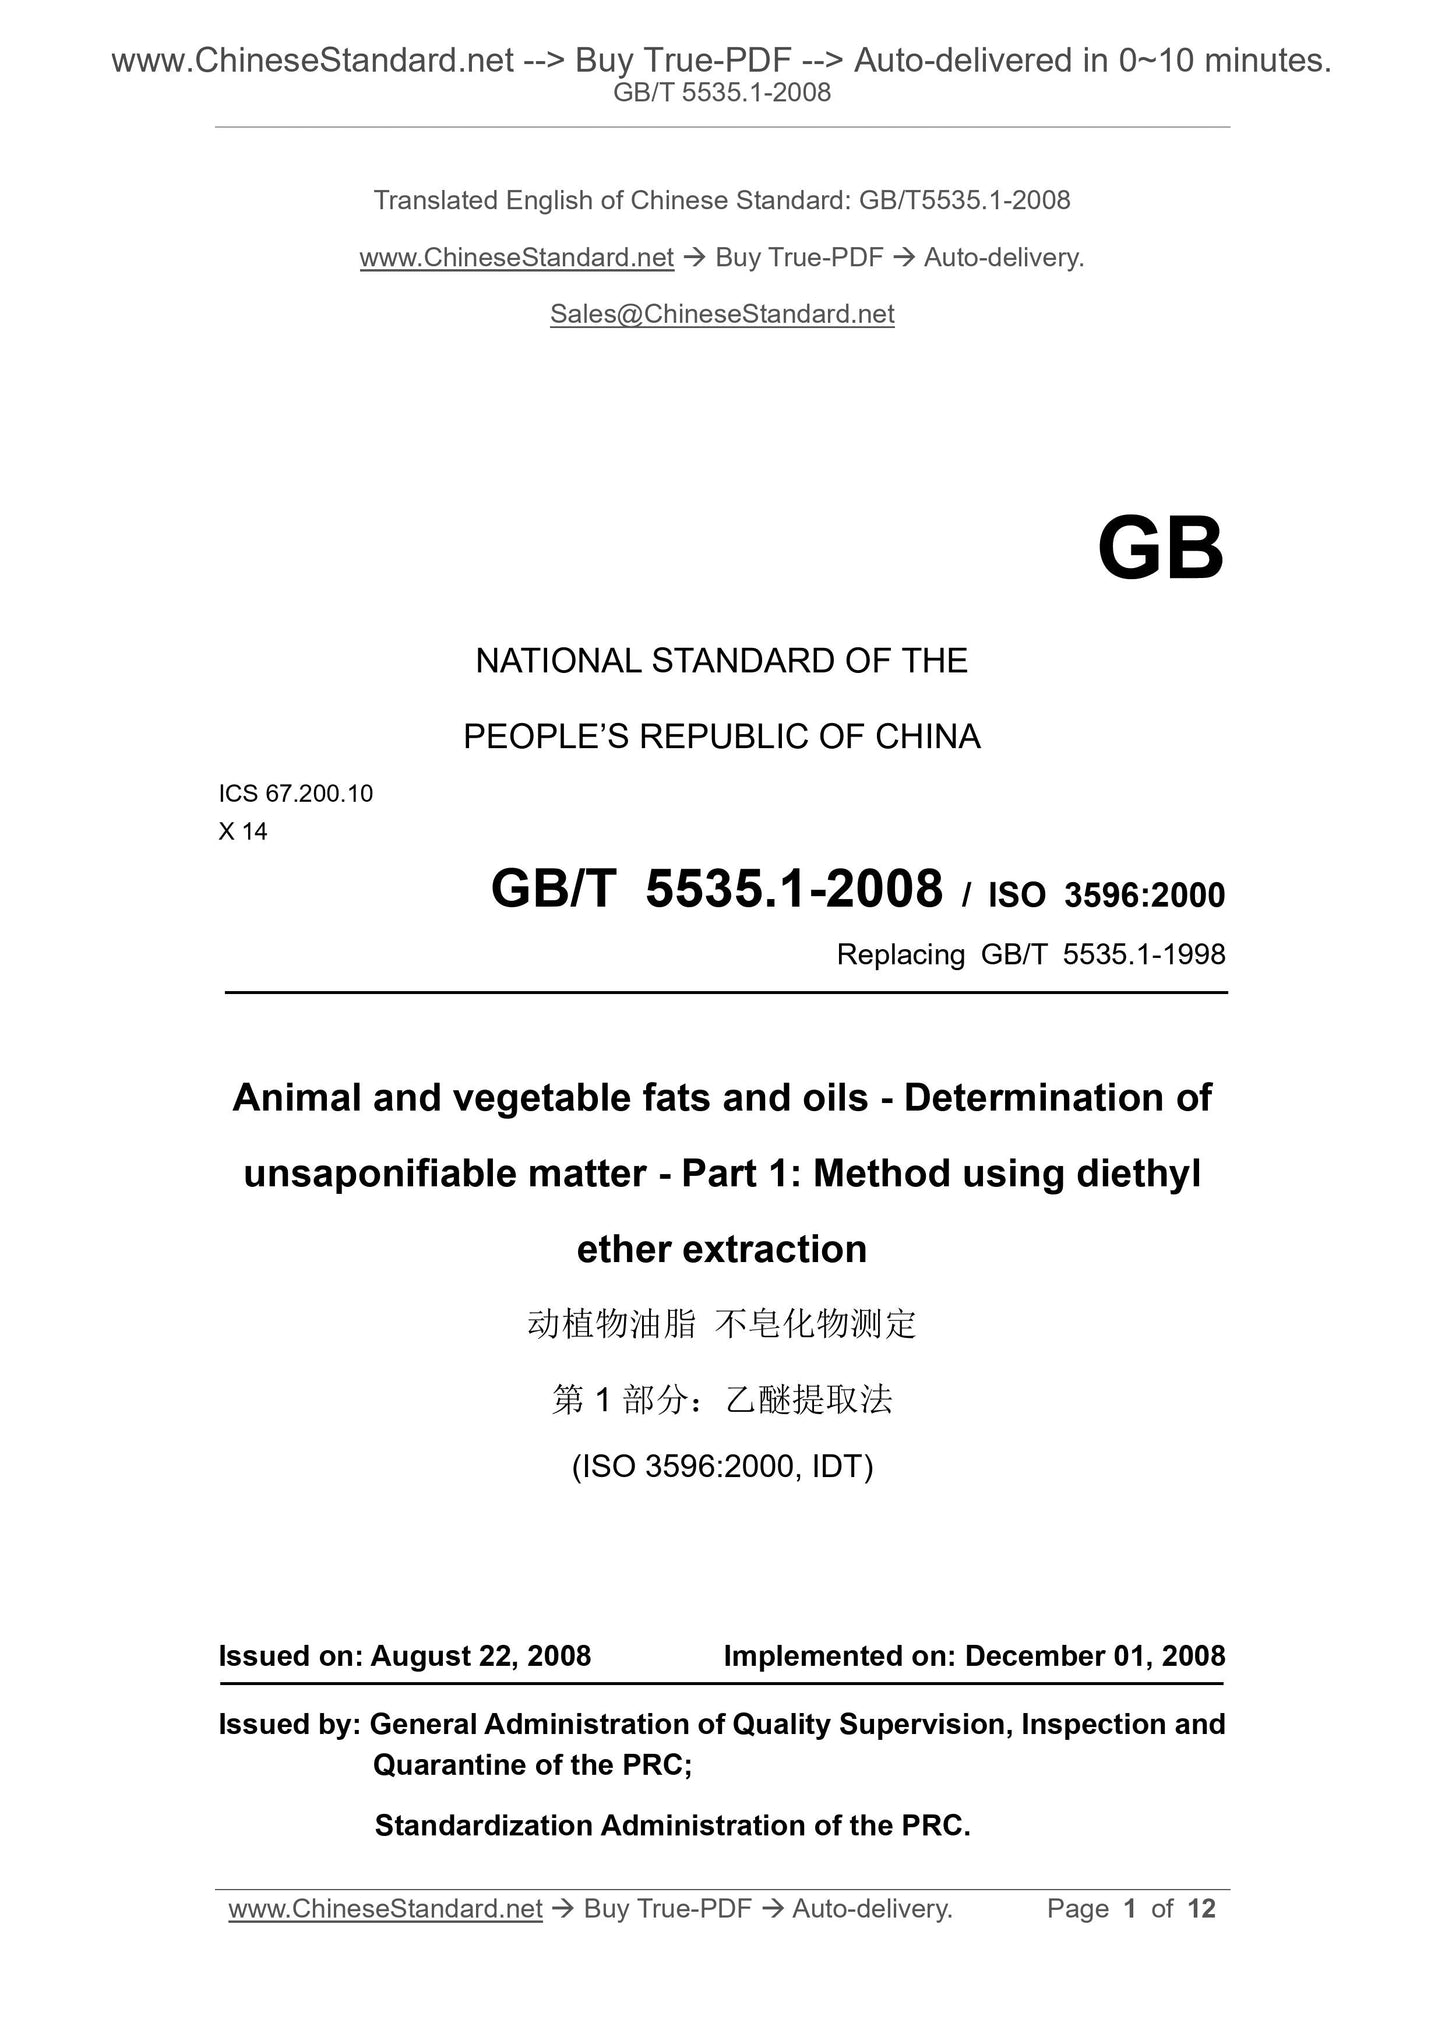 GB/T 5535.1-2008 Page 1